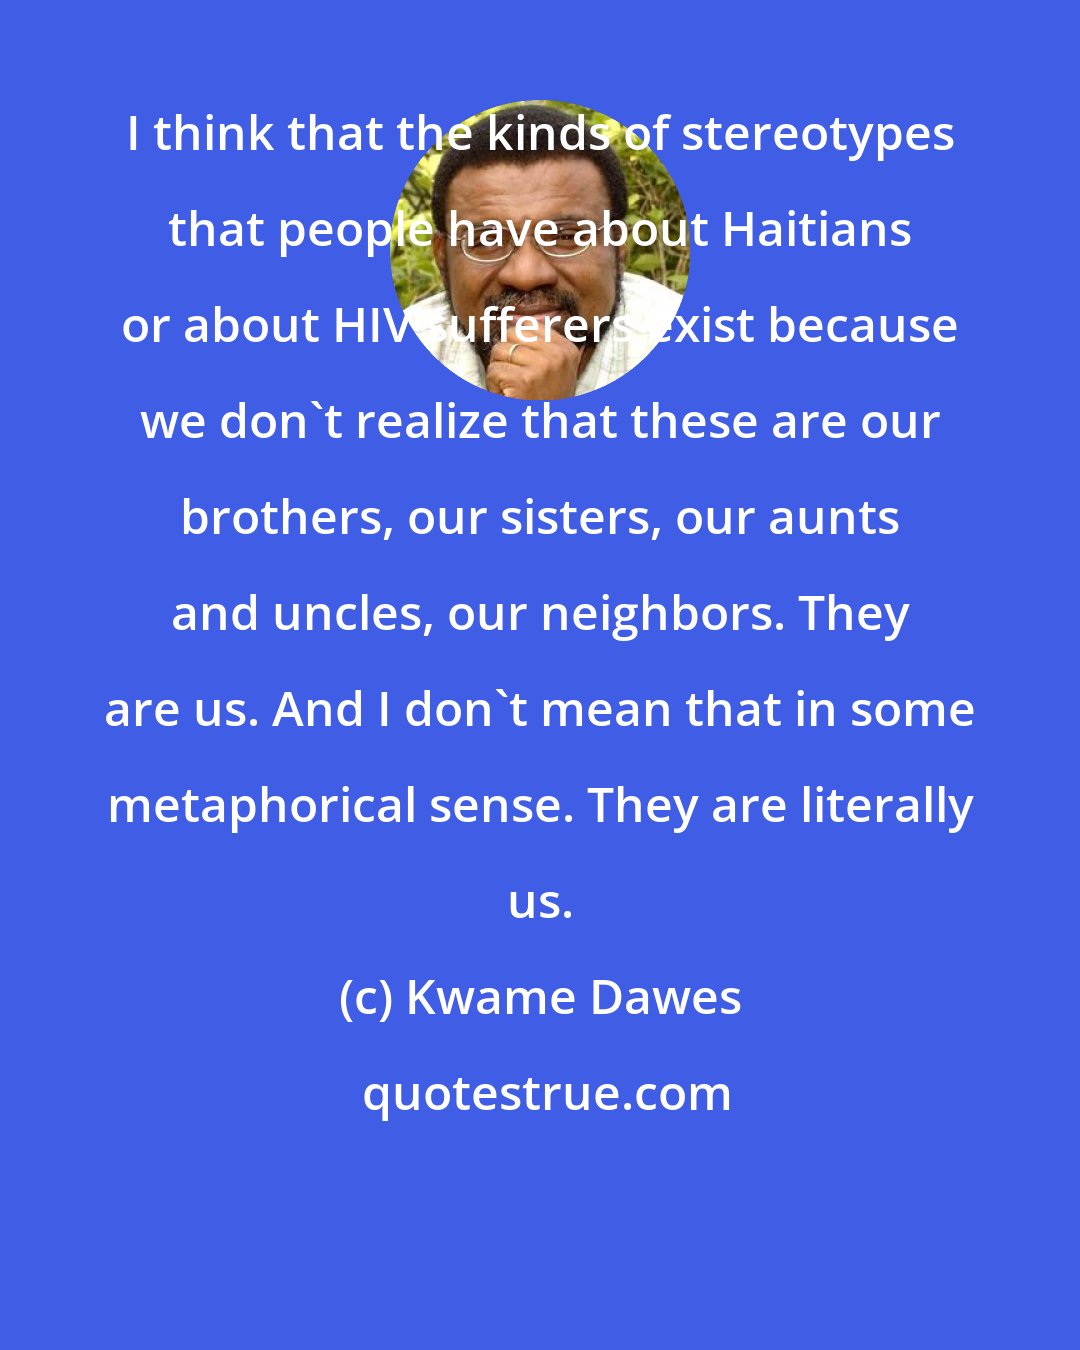 Kwame Dawes: I think that the kinds of stereotypes that people have about Haitians or about HIV sufferers exist because we don't realize that these are our brothers, our sisters, our aunts and uncles, our neighbors. They are us. And I don't mean that in some metaphorical sense. They are literally us.